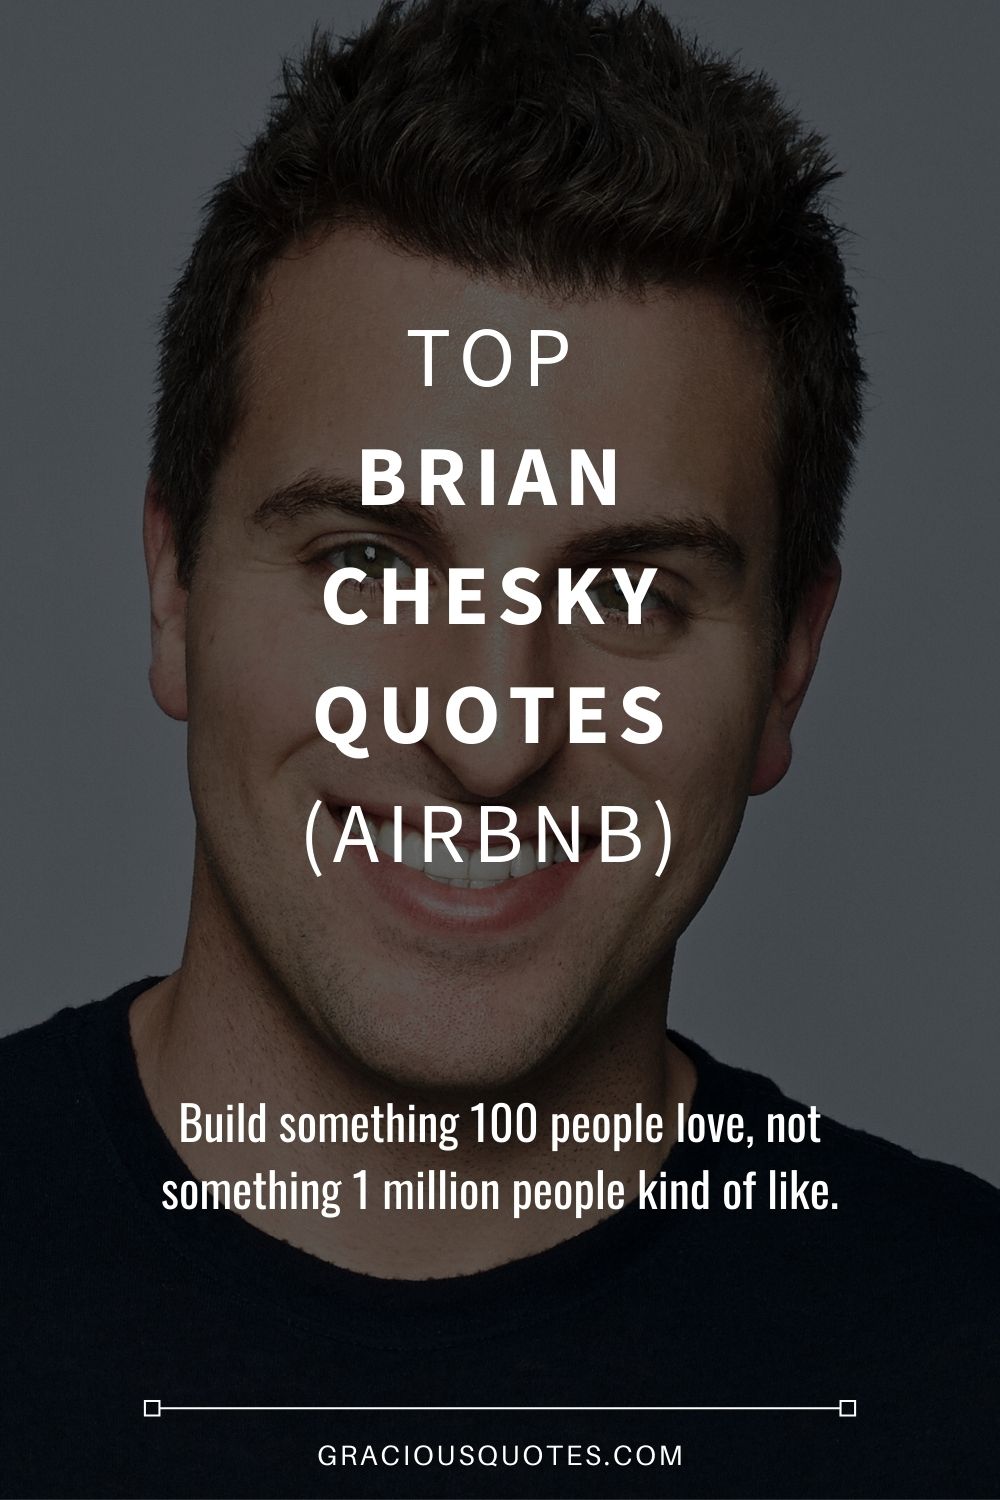 Top Brian Chesky Quotes (AIRBNB) - Gracious Quotes